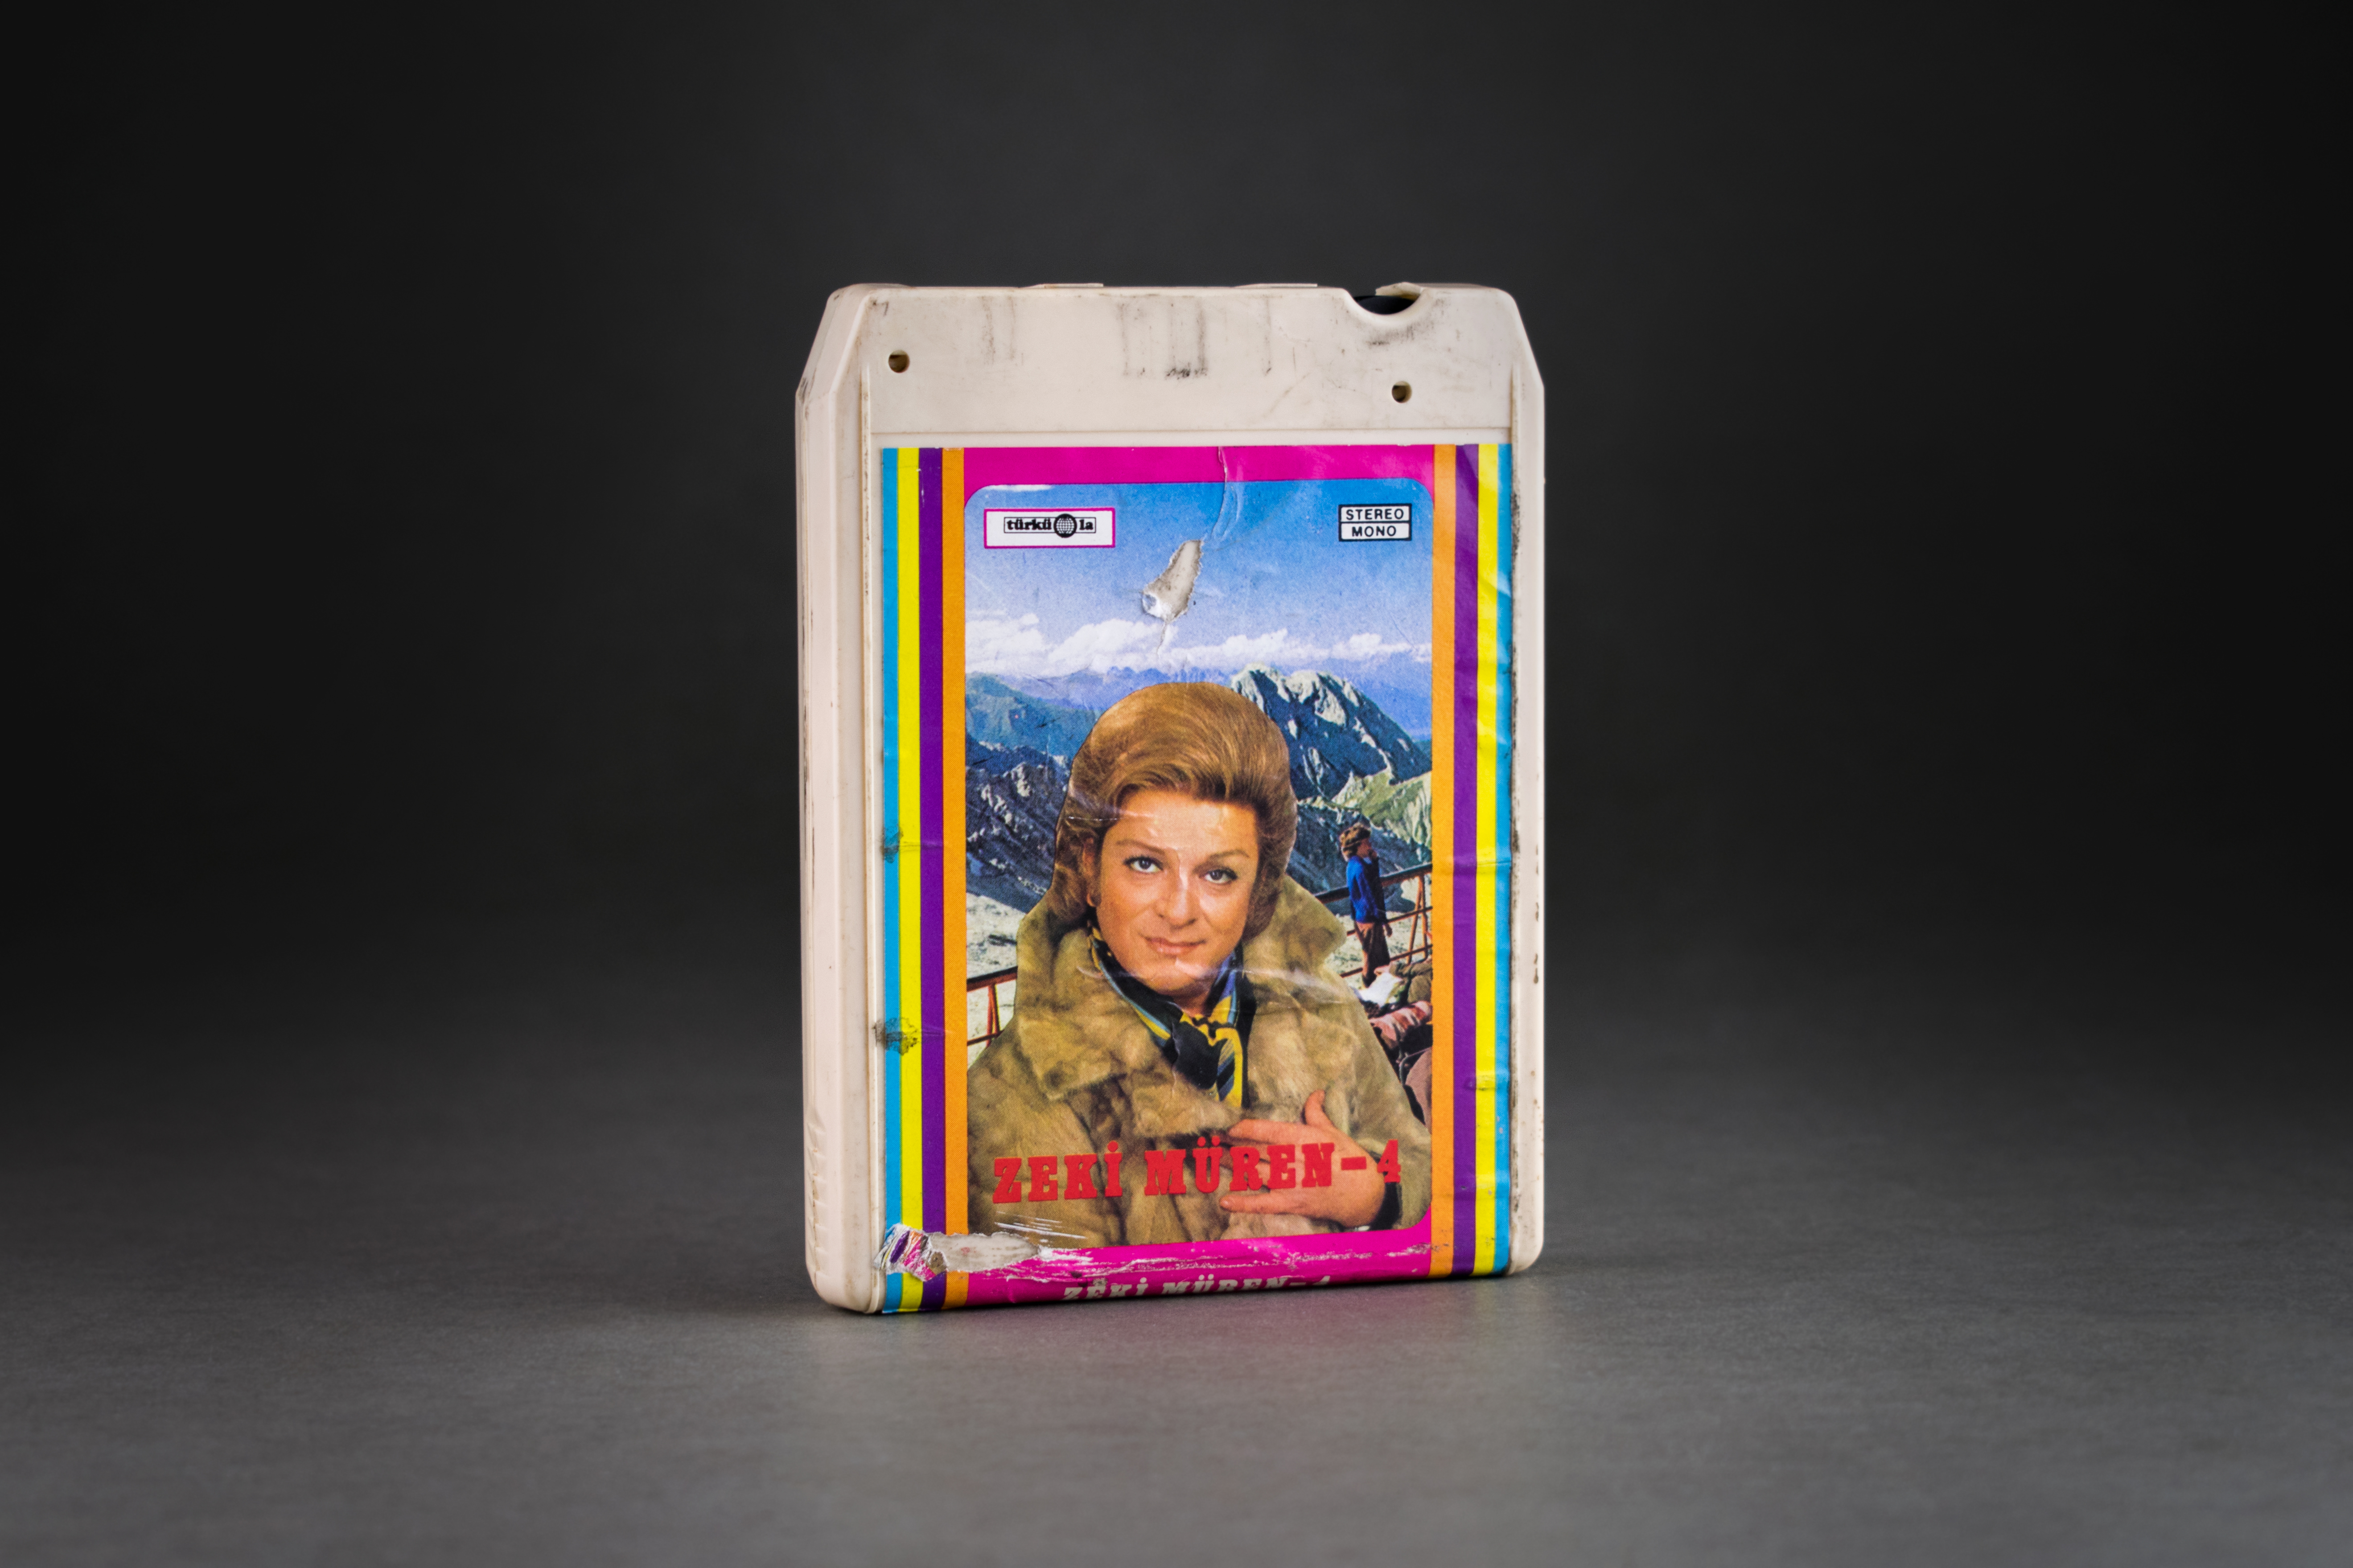 8-track cassette by Zeki Müren, Türküola, 1970. Türküola was the first record company to produce Turkish-language music in Germany. It was founded by Yılmaz Asöcal in Cologne in the 1960s. In addition to LPs, cassettes and later also CDs from well-known Turkish-speaking artists such as Barış Manço, İbrahim Tatlıses or Zeki Müren, from the 1960s, Türküola also contracted numerous migrant workers who had only started a musical career in Germany. This group also included the two best-selling artists from the record label, Metin Türköz and Yüksel Özkasap, who also gained fame in Turkey. In the 1980s, Türküola produced the albums of the well-known musician Cem Karaca. DOMiD Archive, Cologne, BT 0612,0008